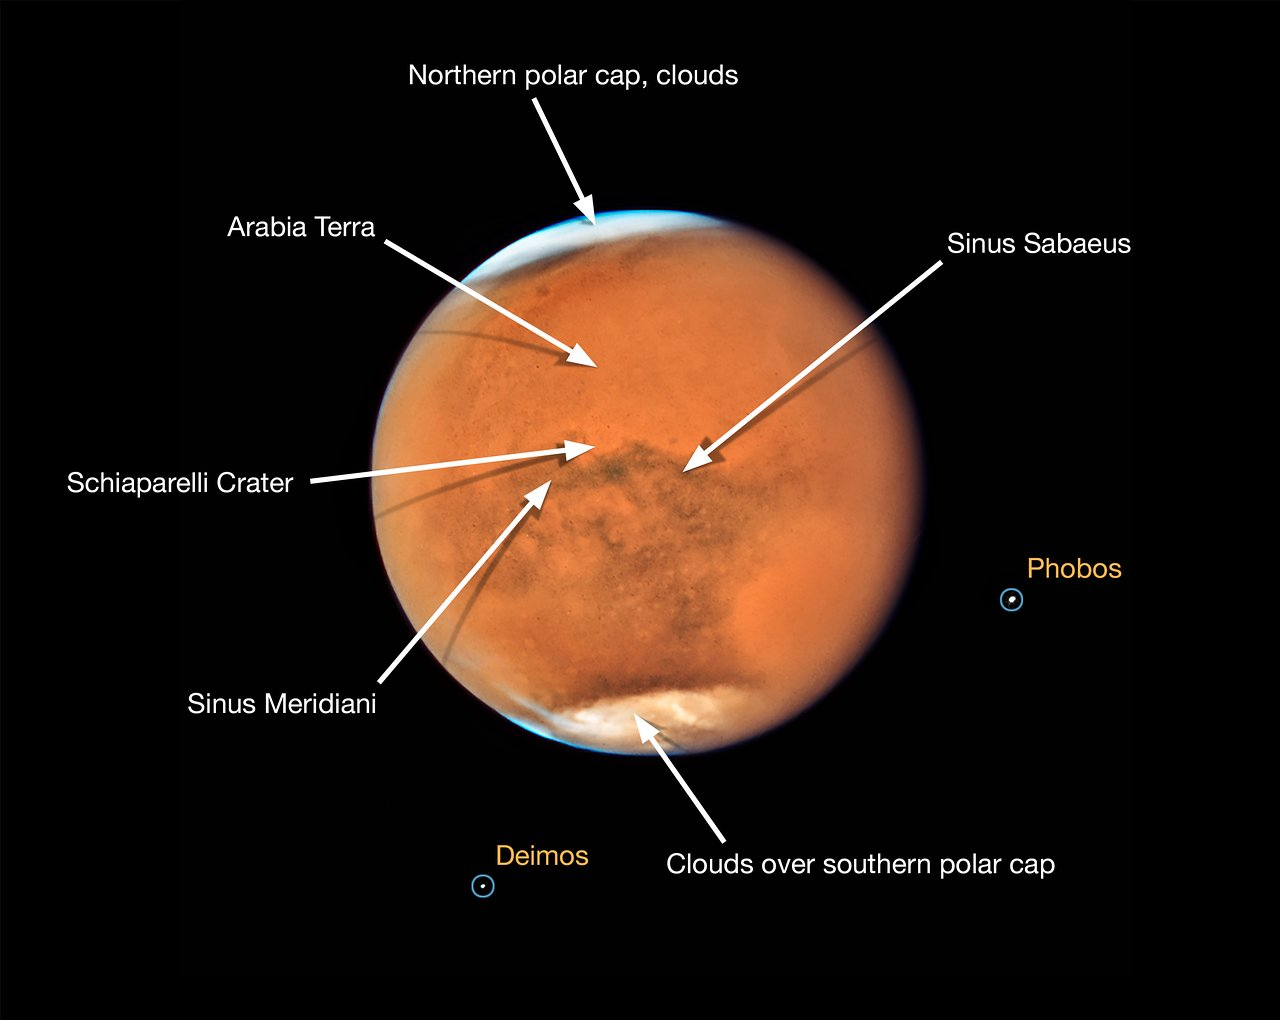 Mars In Opposition In 2018 annotated ESA Hubble